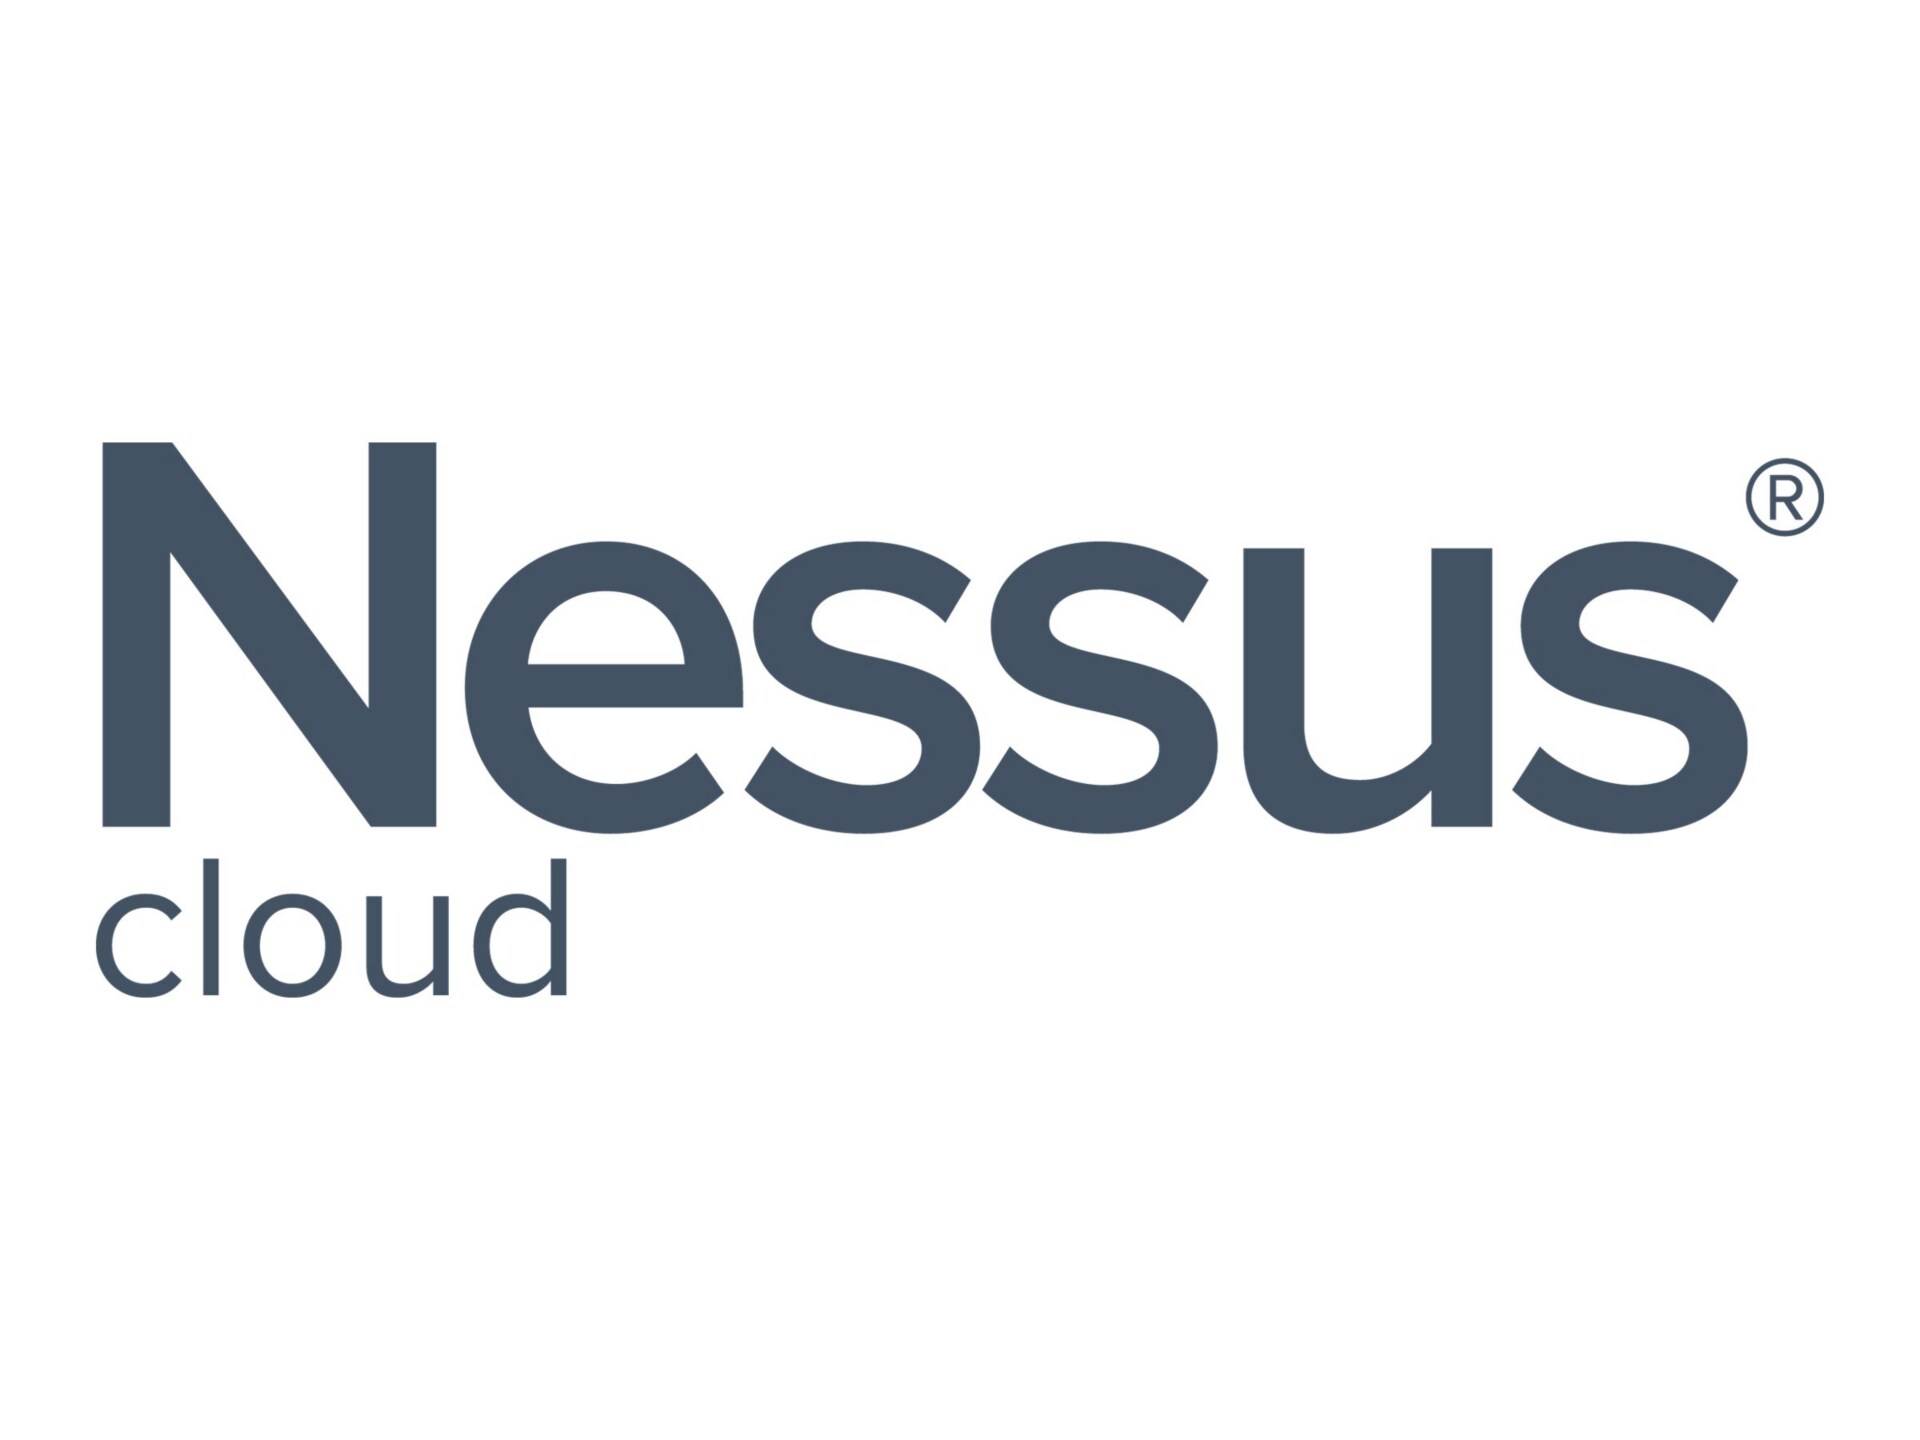 Nessus Cloud - subscription license renewal (1 year) - 1 additional scanner, 256 hosts, 256 agents